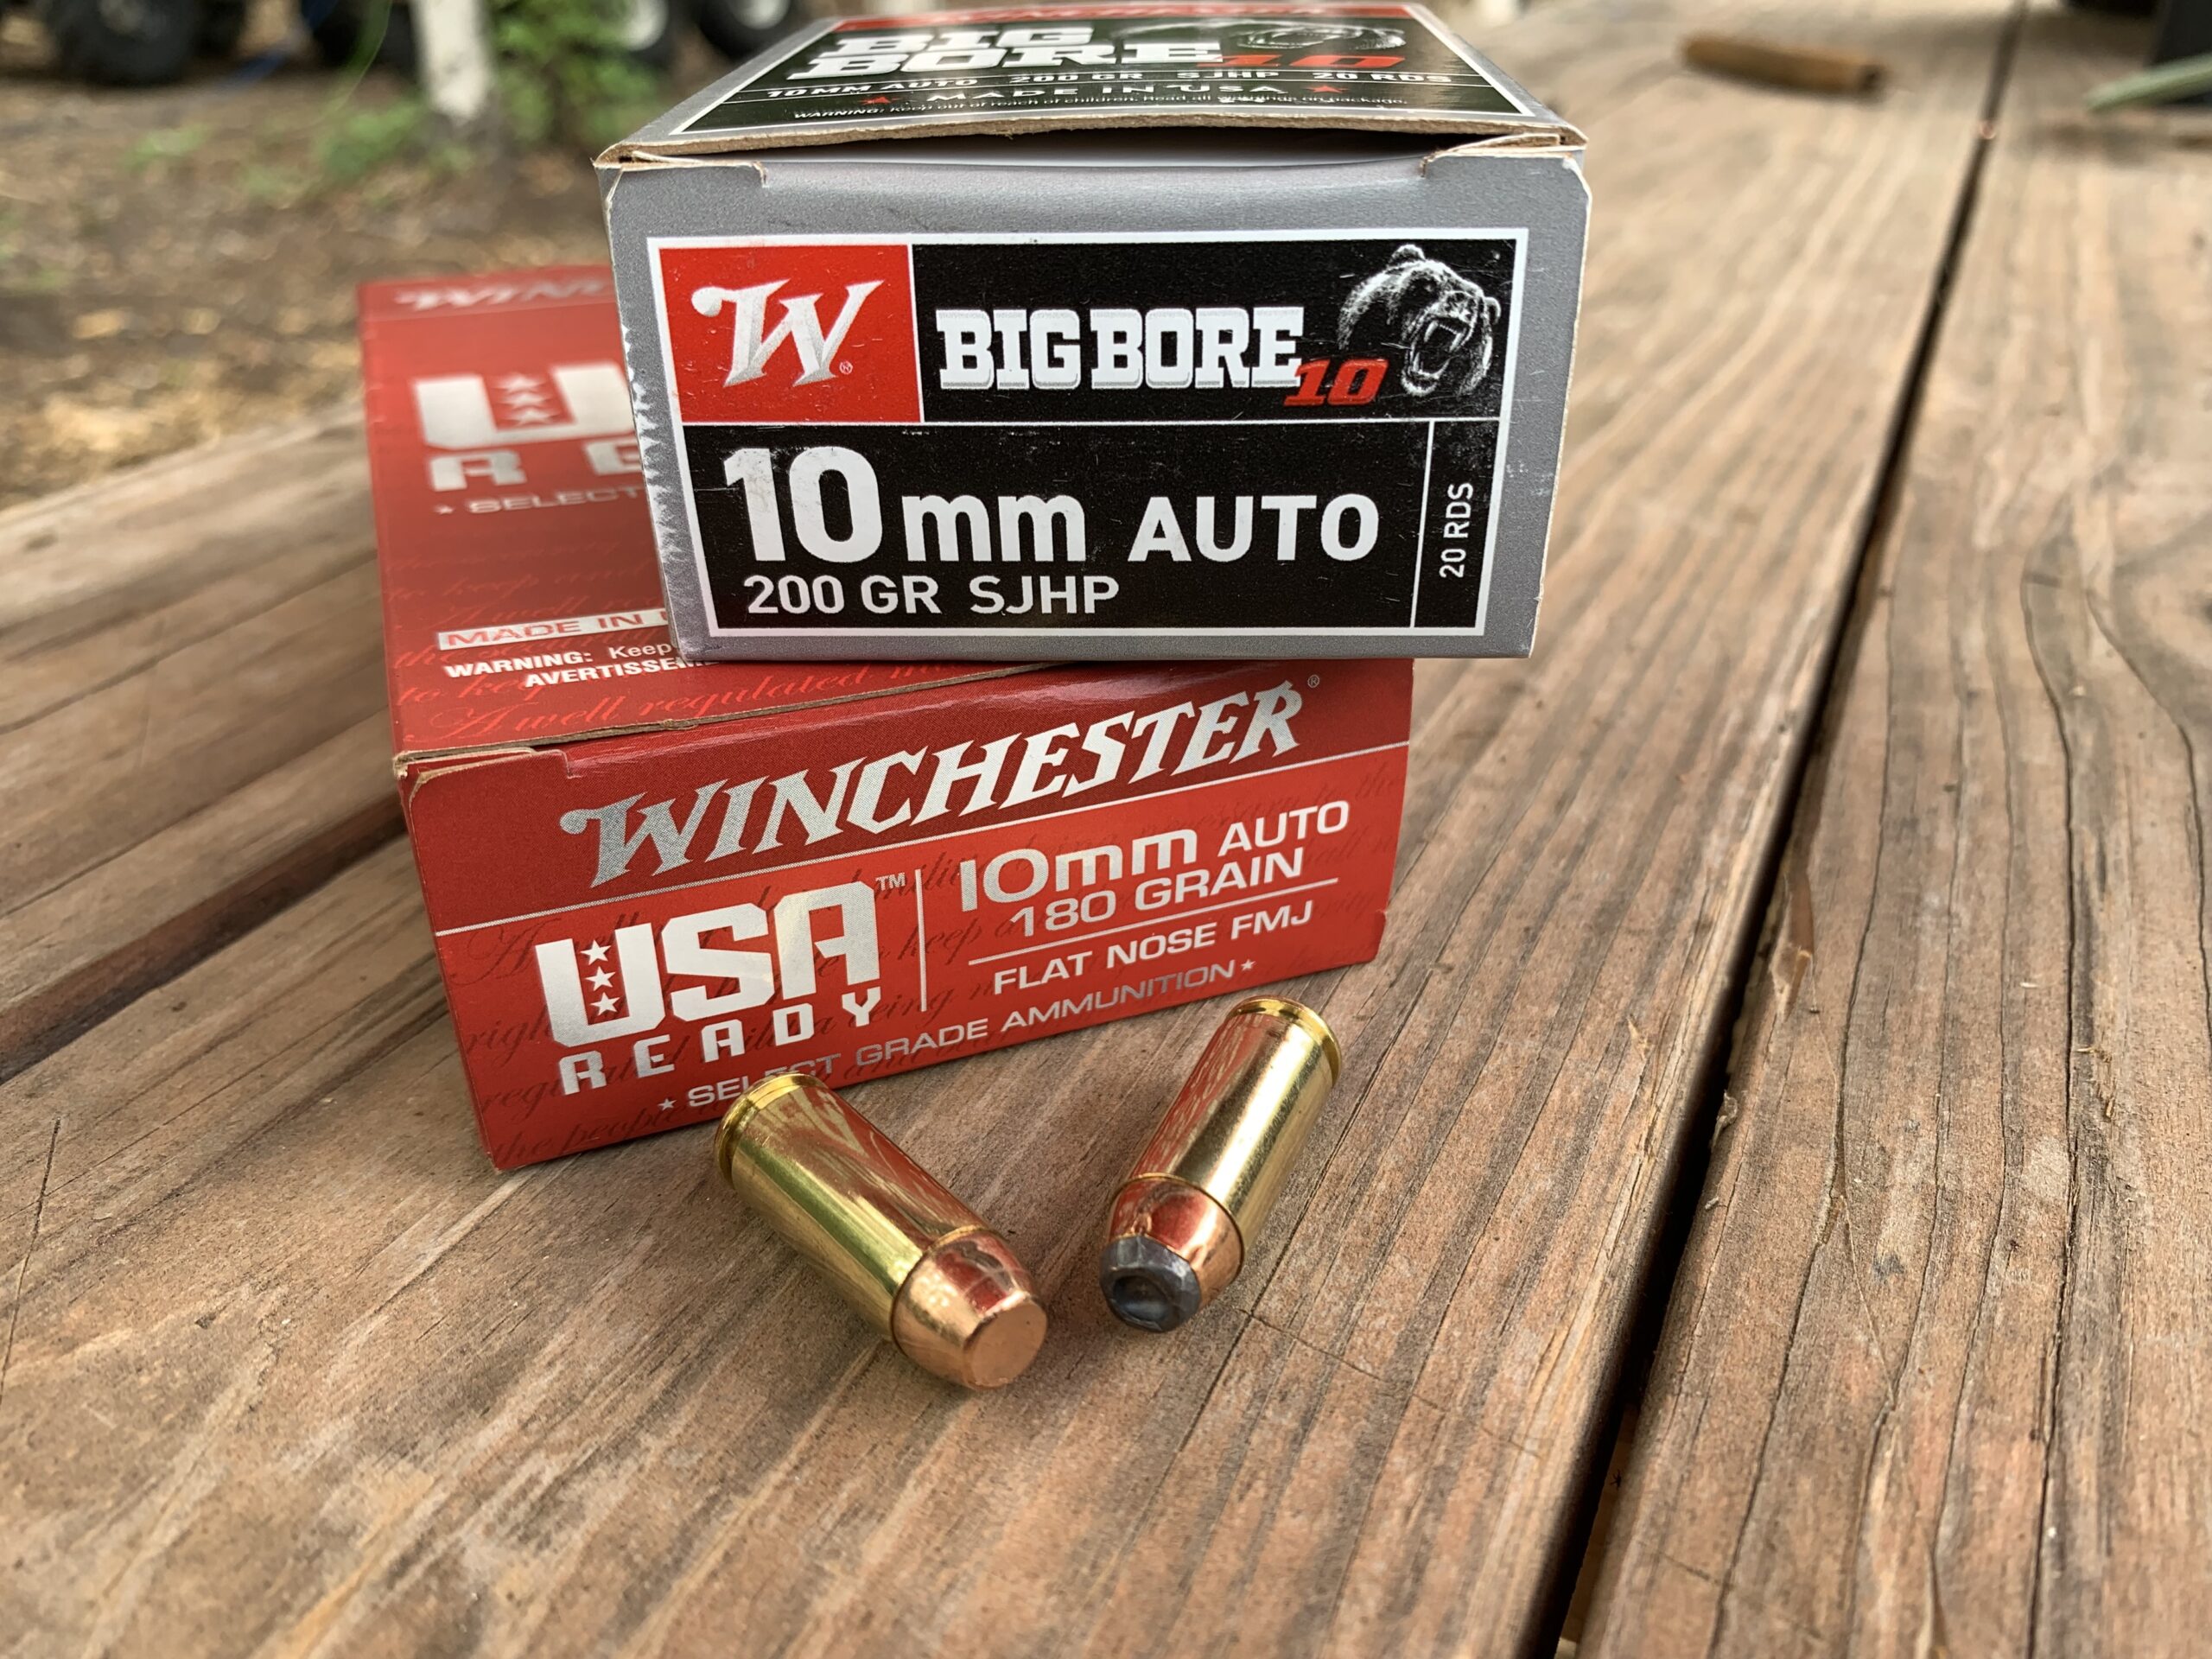 9mm vs 10mm, 10mm practice and defense ammo